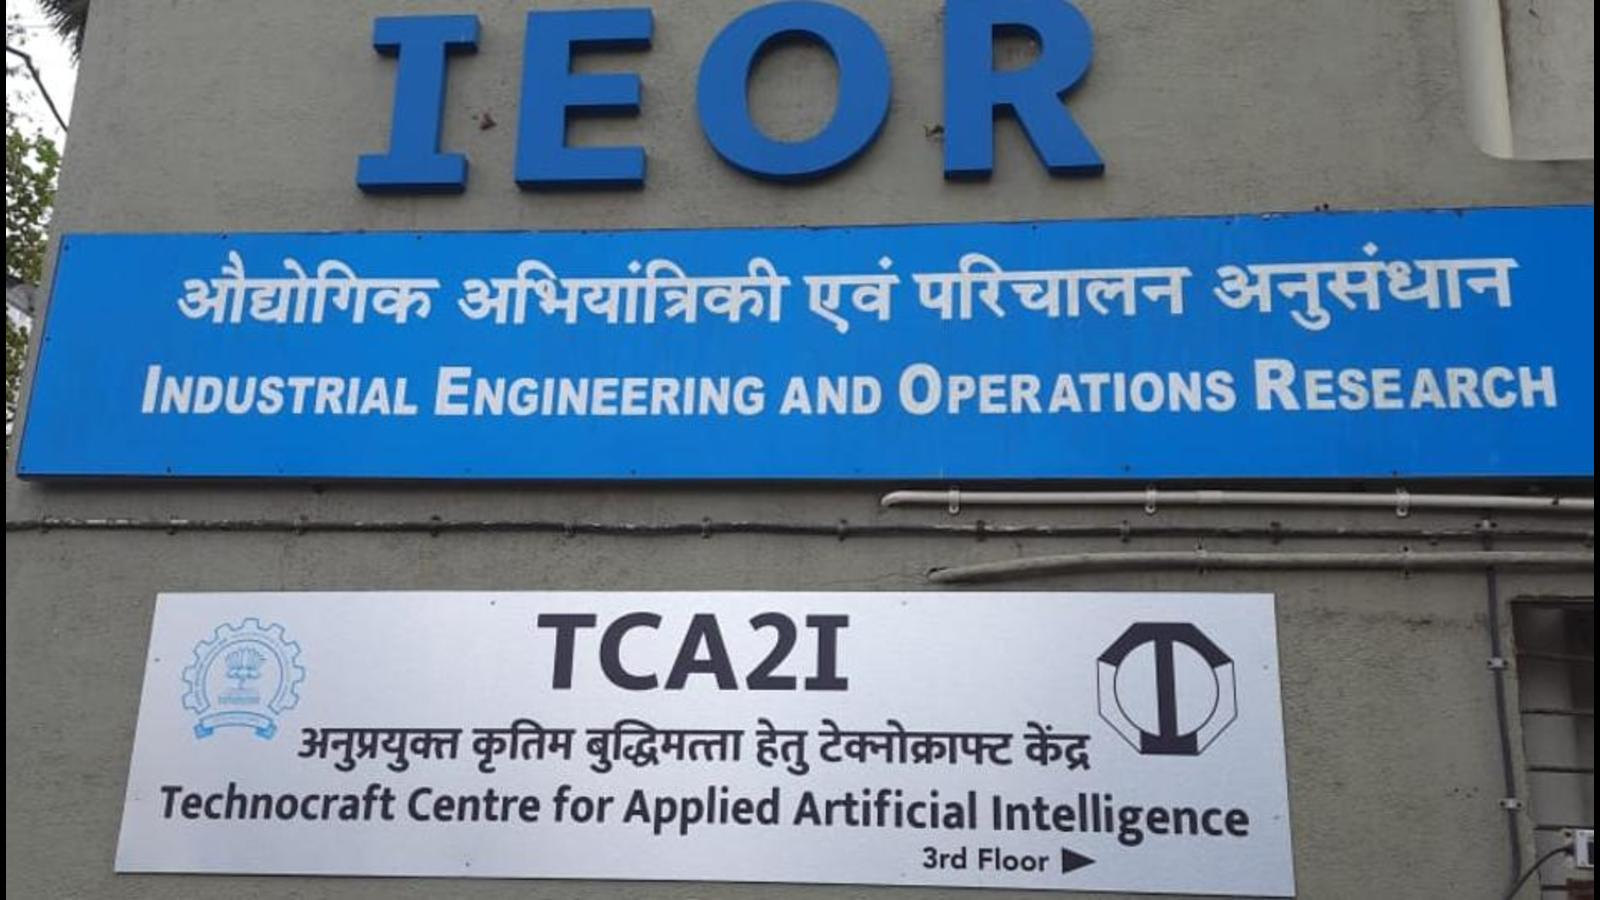 MS by Research in CSE at IIT Bombay